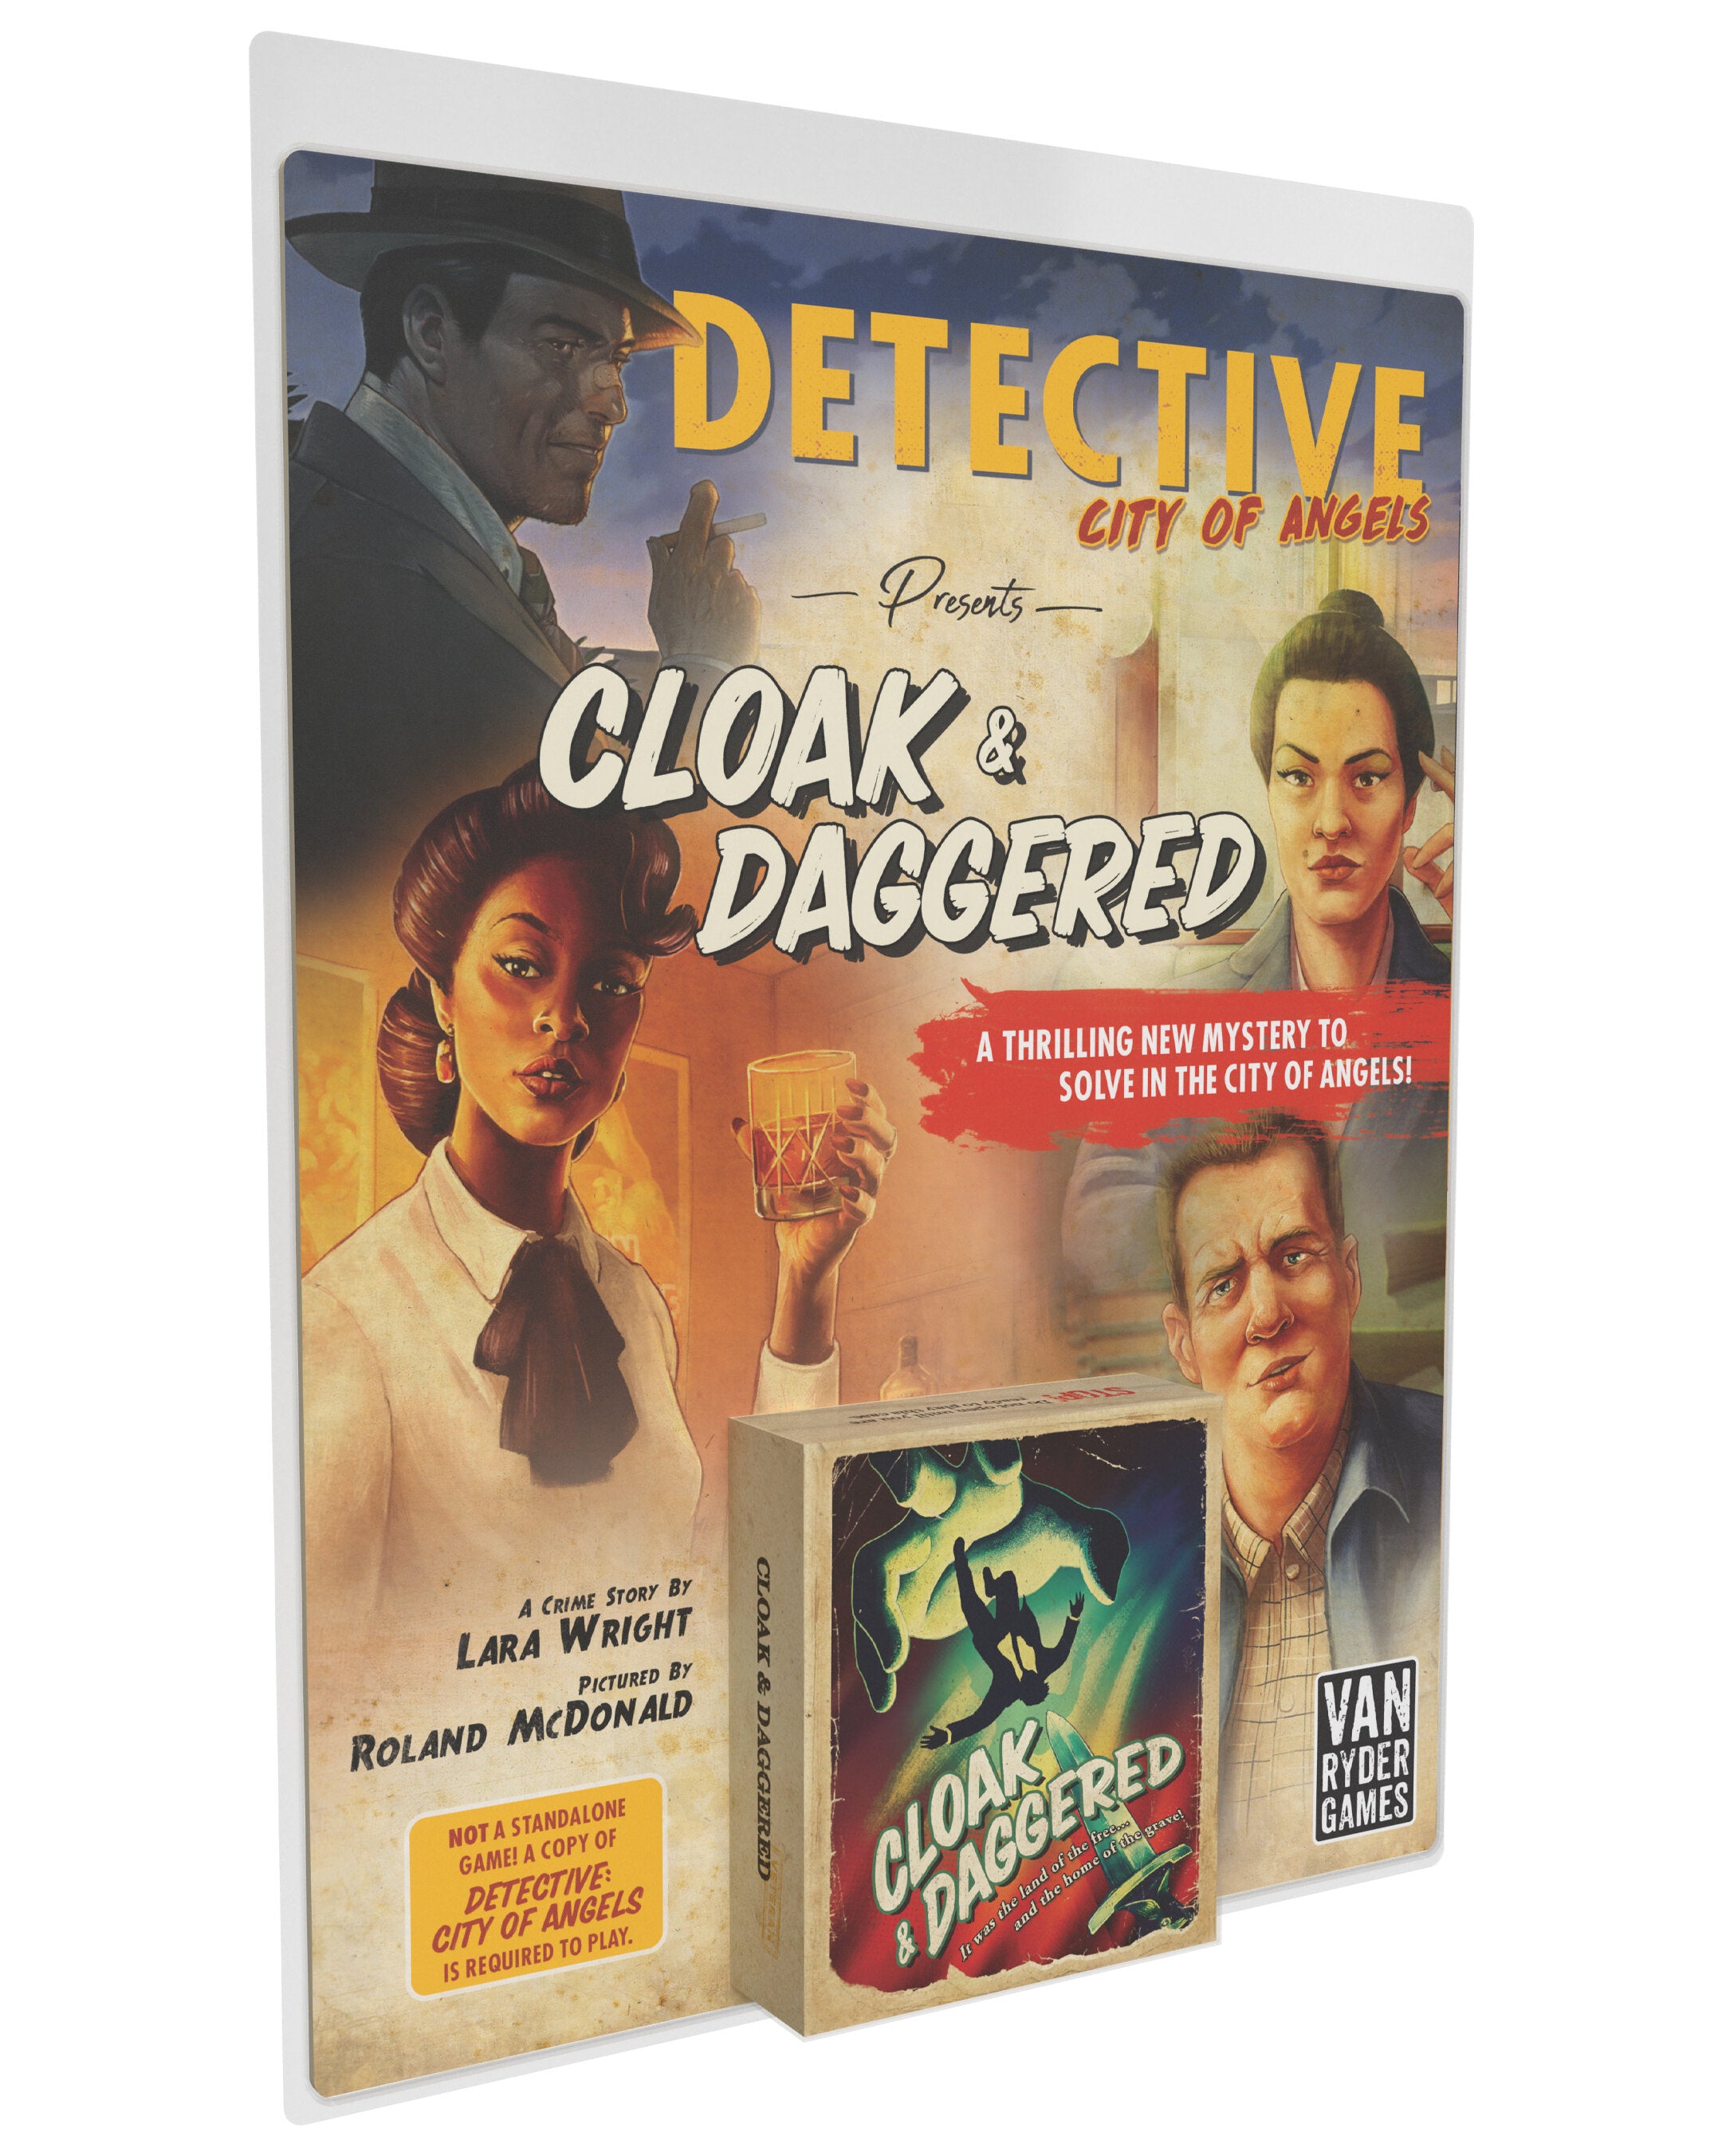 Rental - Detective: City of Angels: Cloak and Daggered Expansion